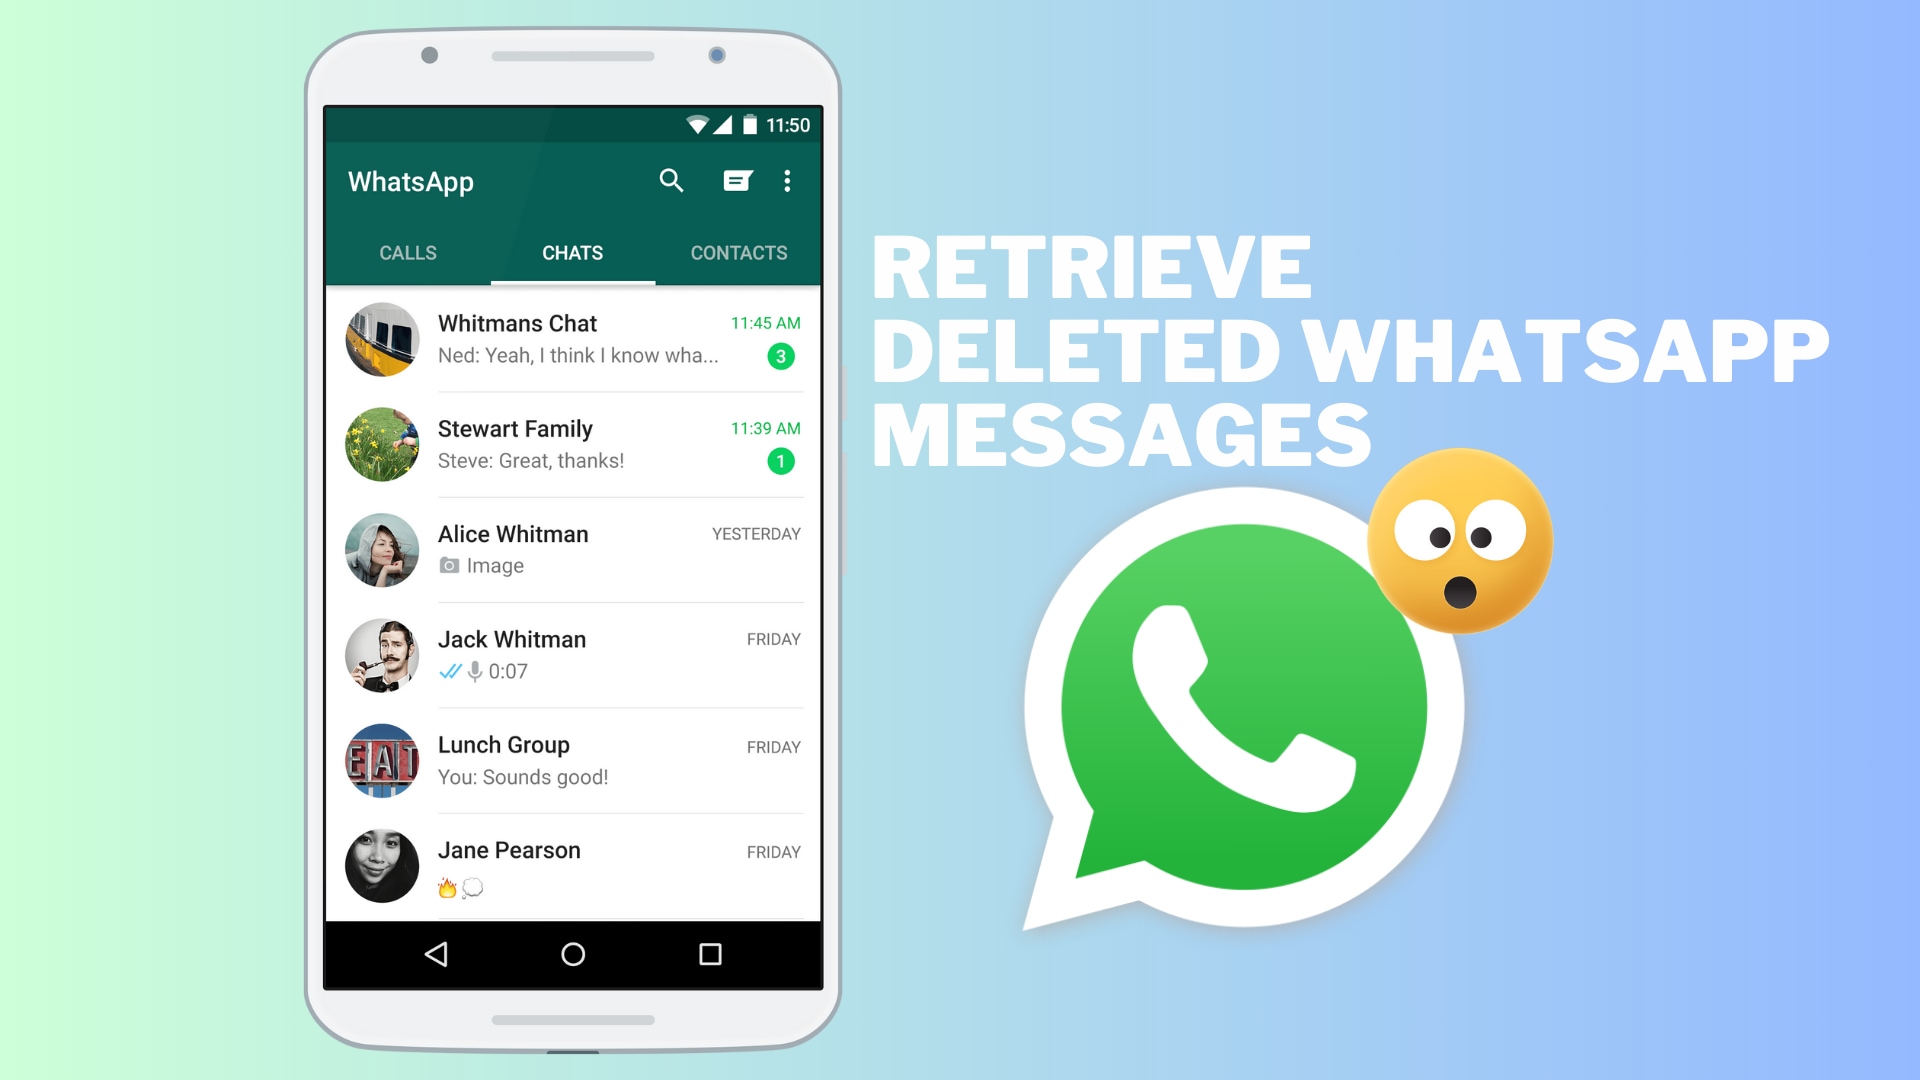 Retrieve deleted WhatsApp messages on Android.